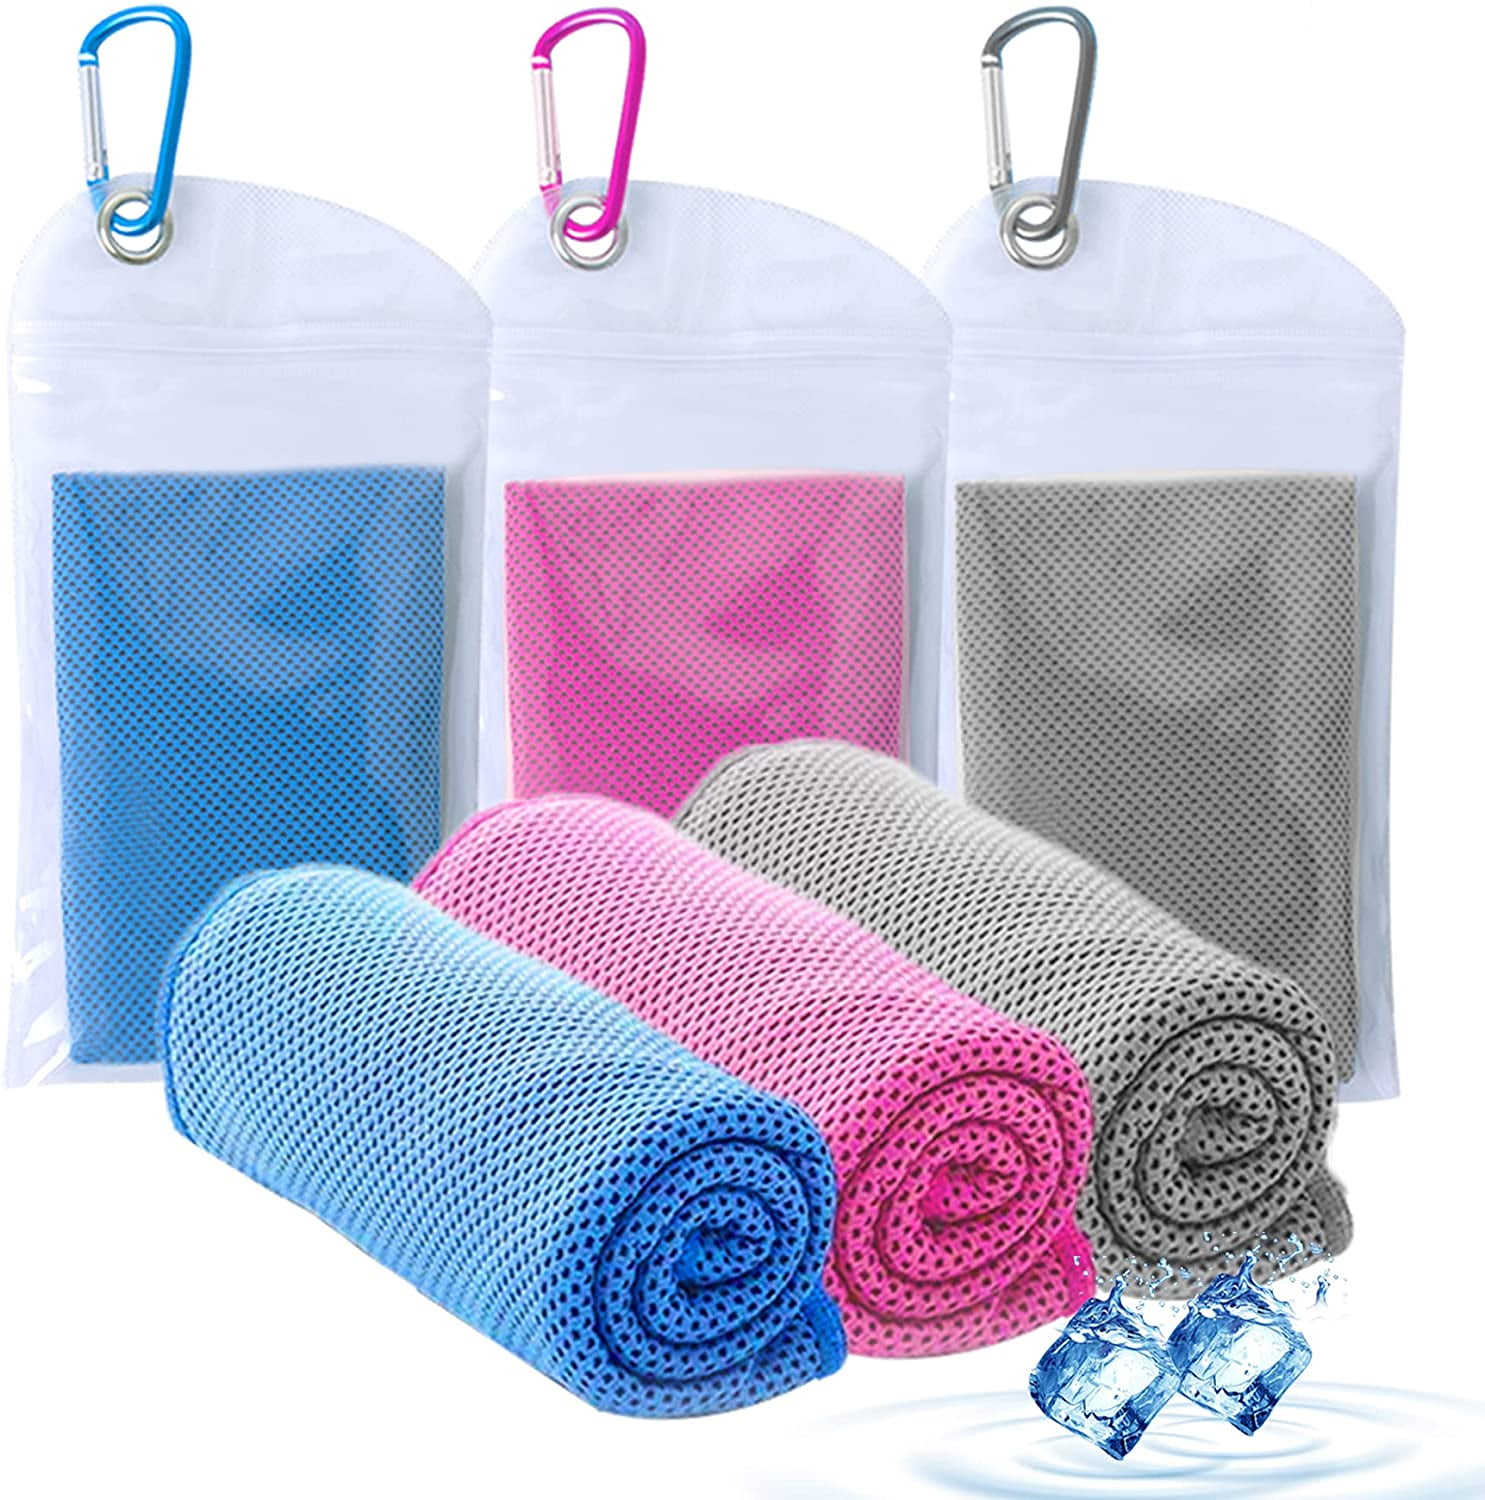 Details about   Cooling Towel Sports Fitness Gym Yoga Pilates Camping Yard Work 29x3 Inches 